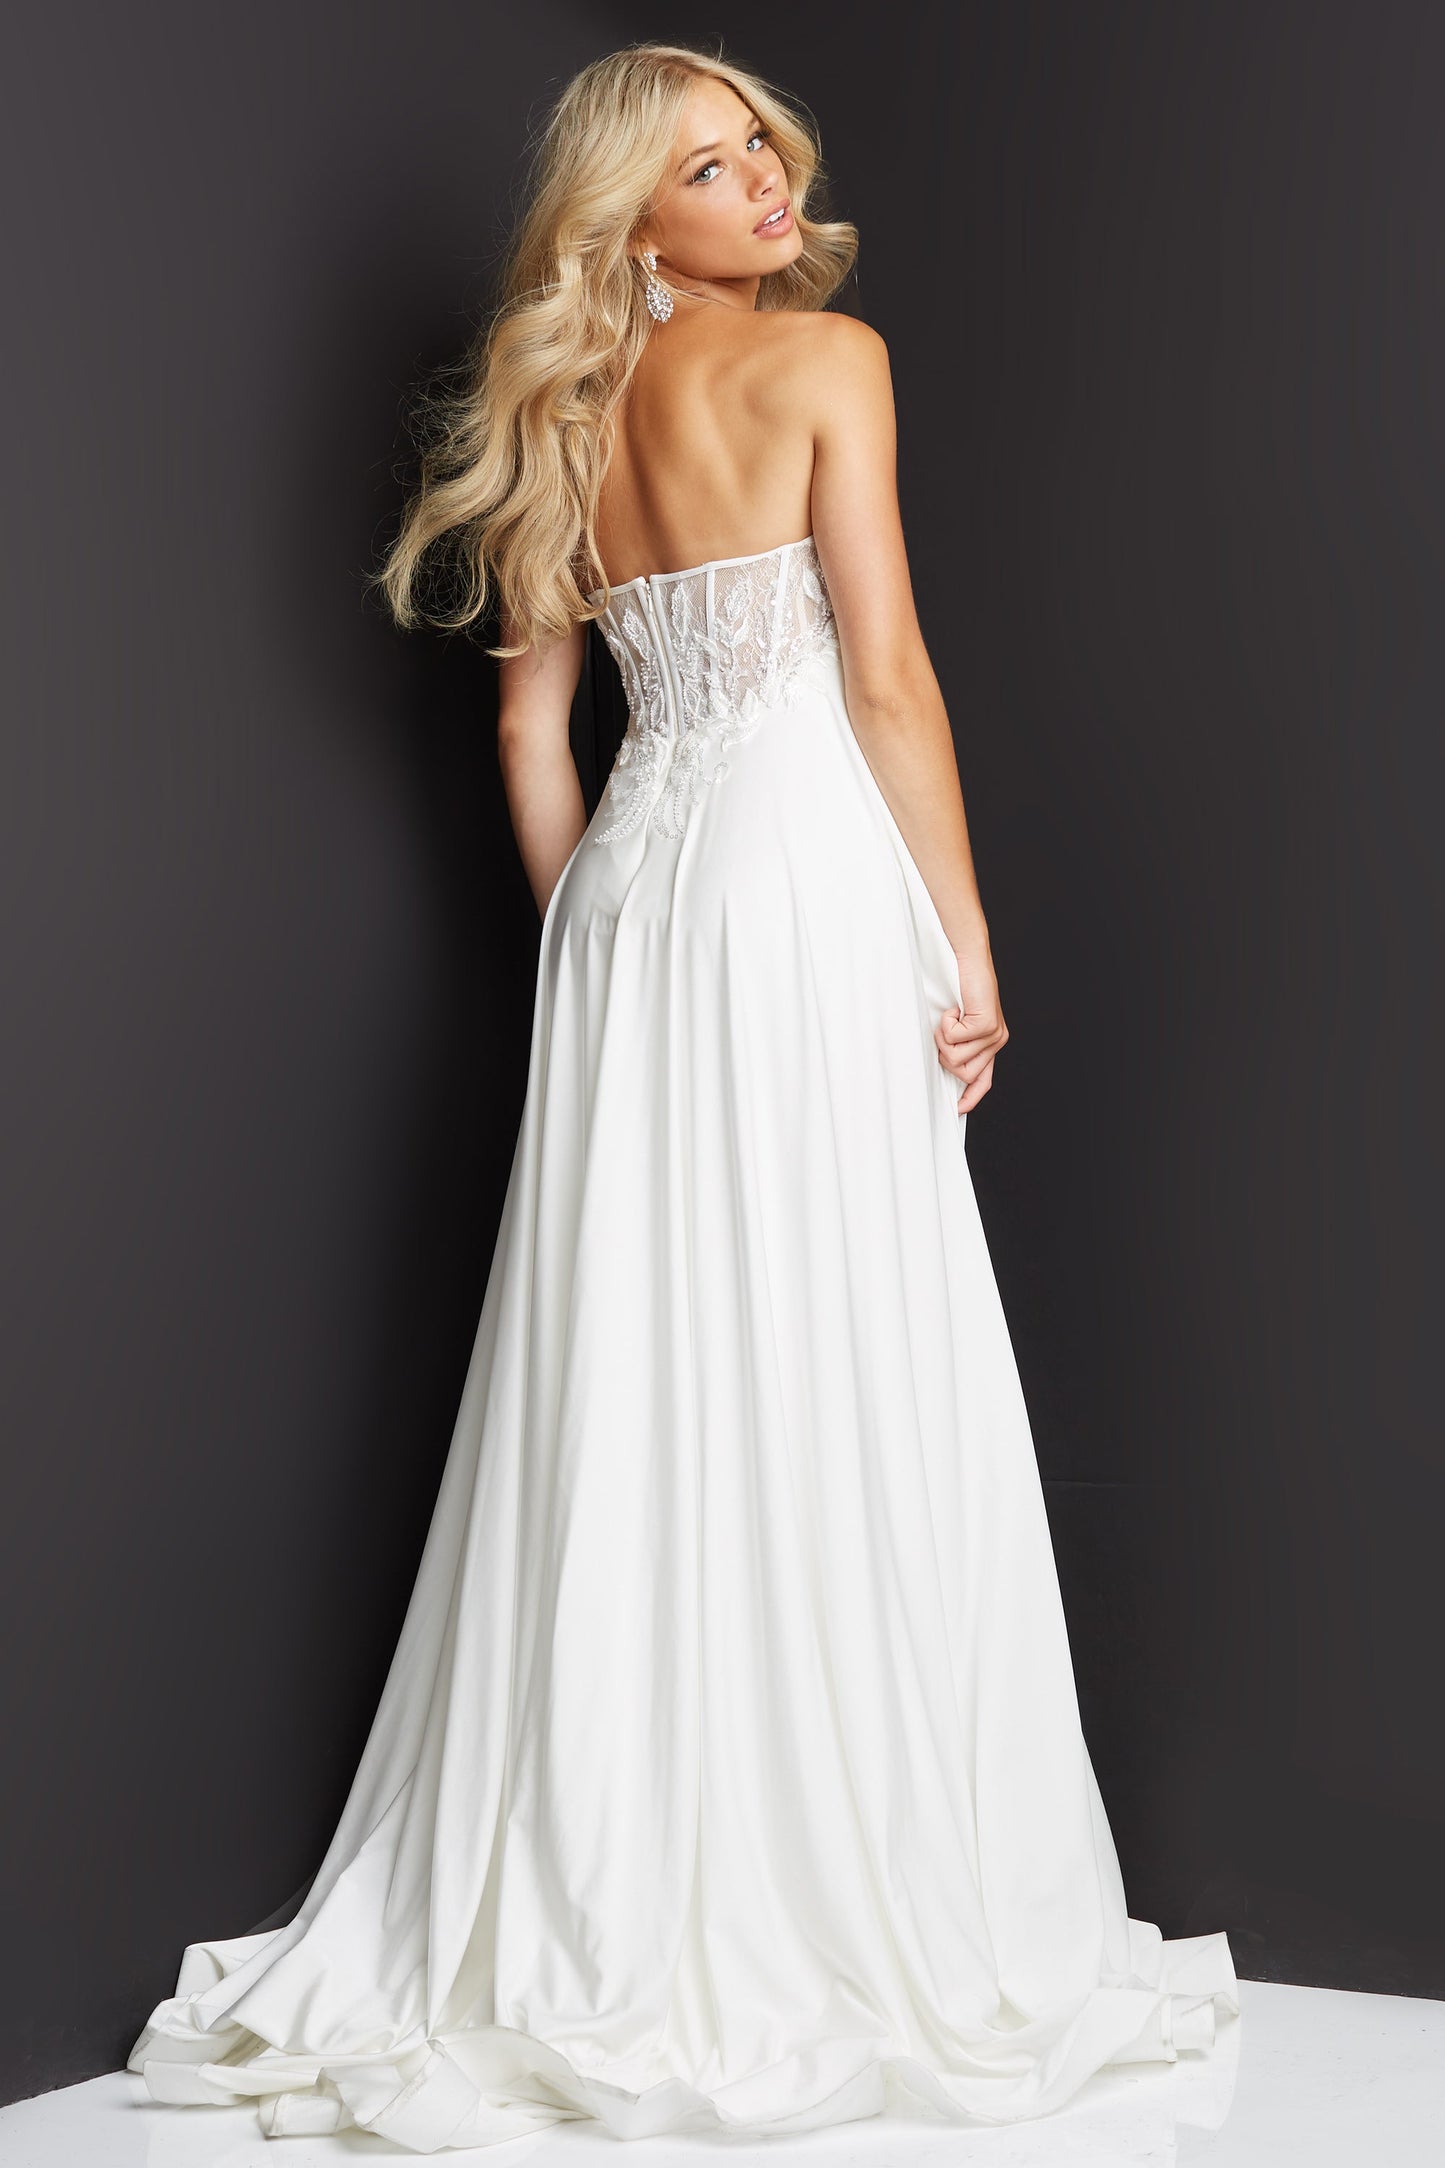 JVN07648 Long Flowy Prom Dress Pageant Gown. Strapless with Ruching and a high slit.  Would make a nice informal wedding dress.   Size 8 Ivory  Available Size-00-24  Available Color- Black, Ivory  JVN 07648